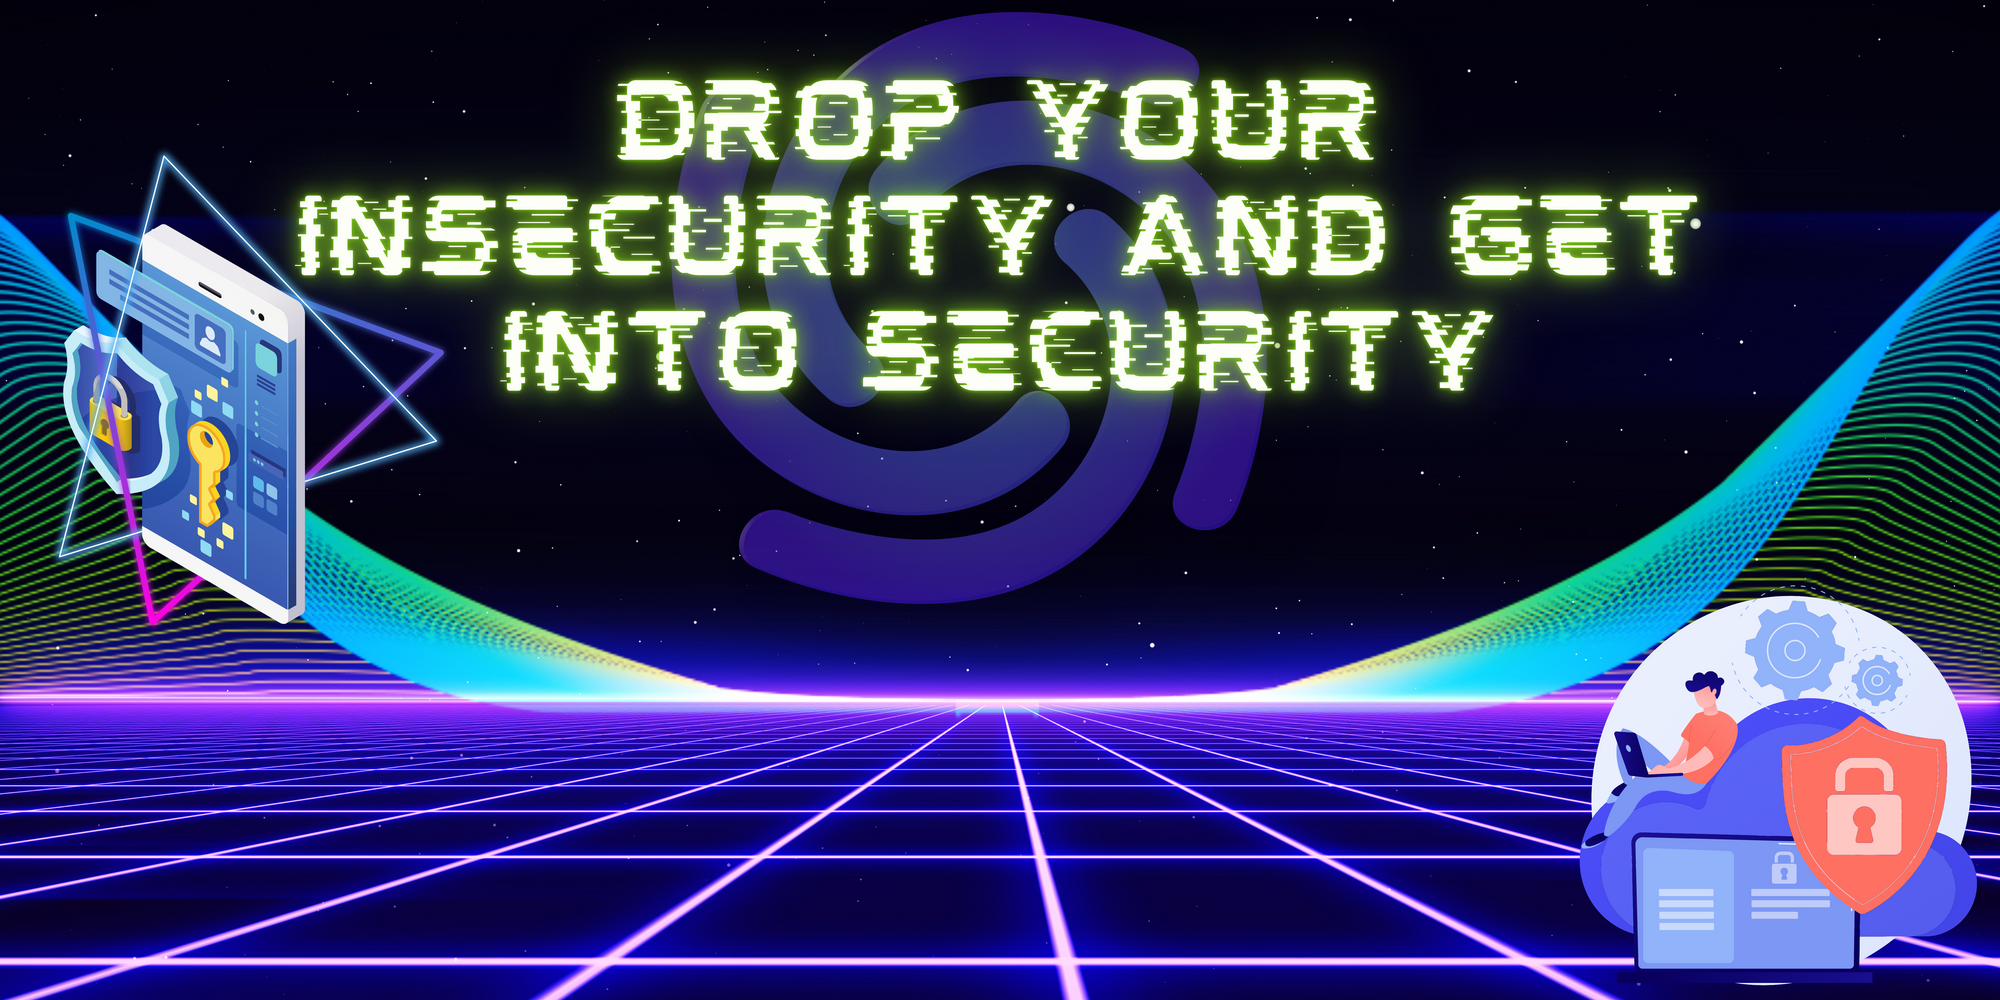 Drop Your Insecurity and Get Into Security